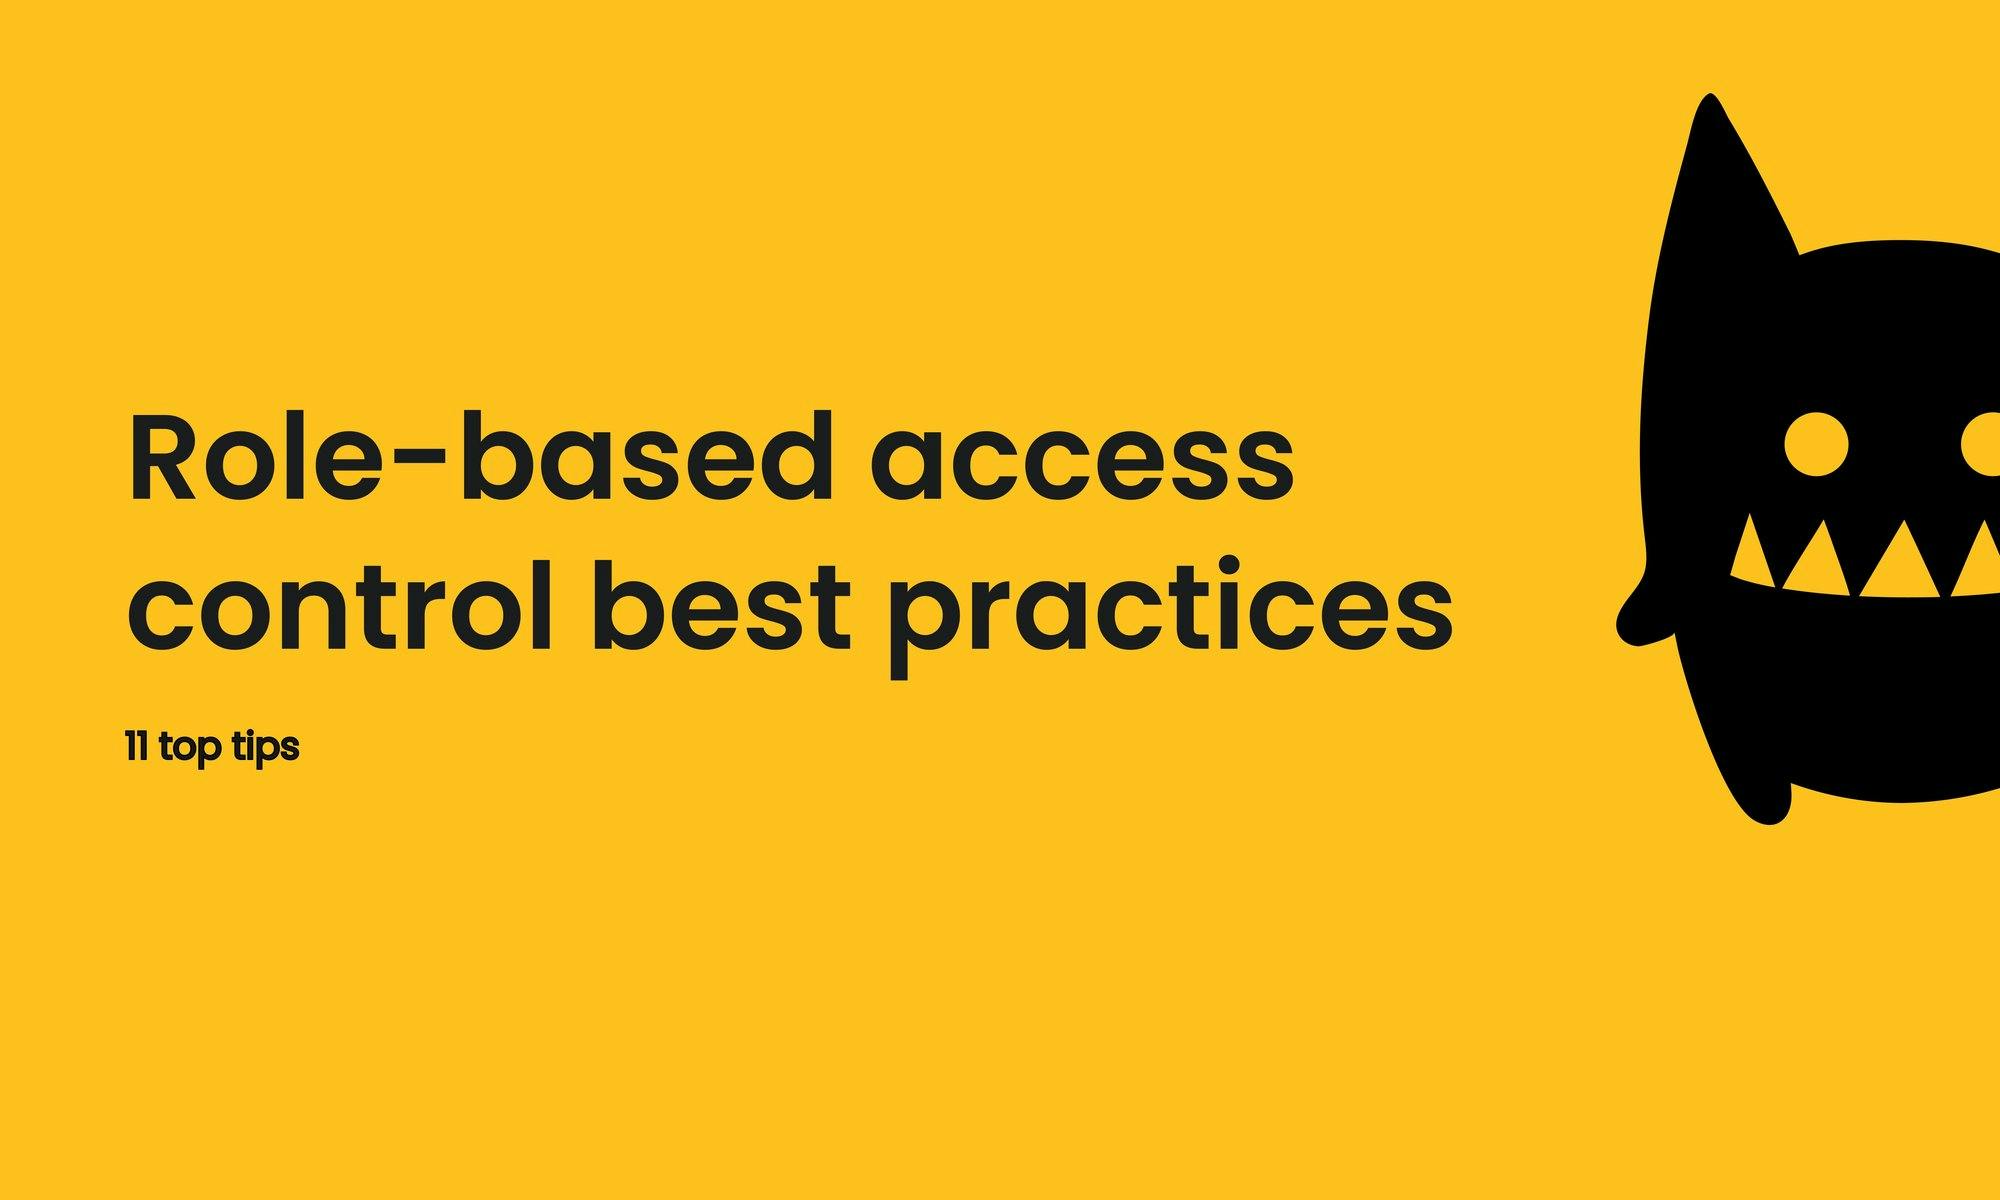 Role-based access control best practices: 11 top tips